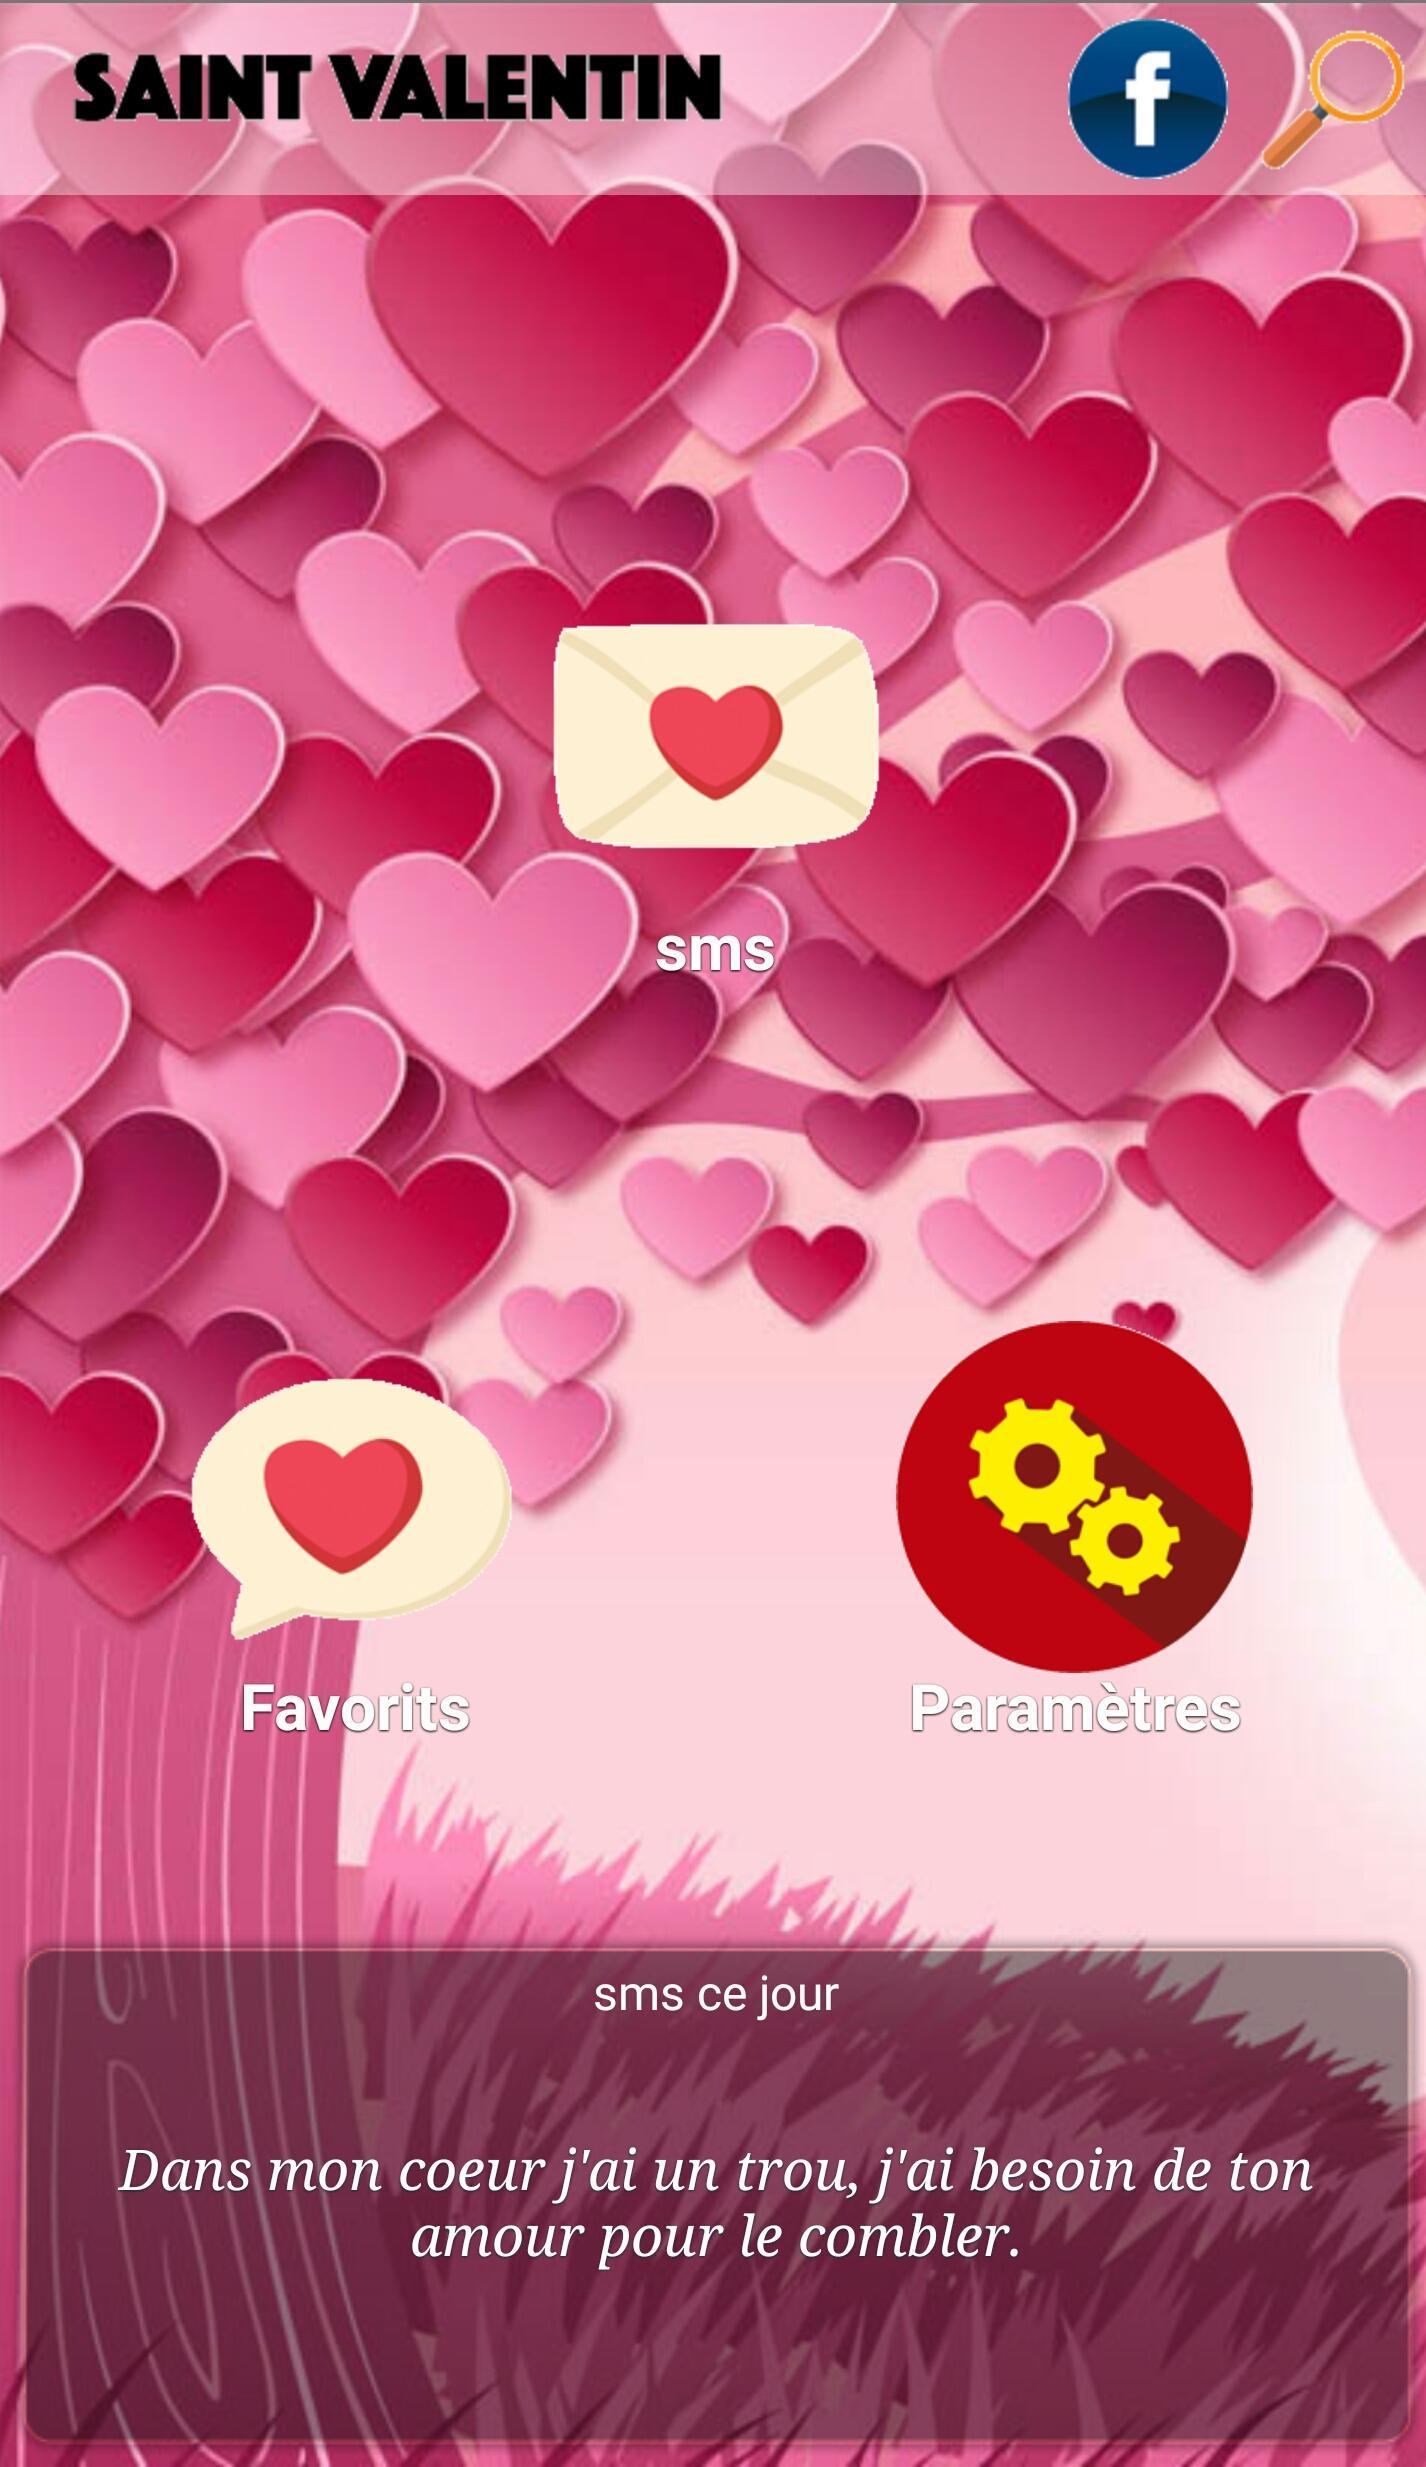 Sms Saint Valentin 2017 For Android Apk Download